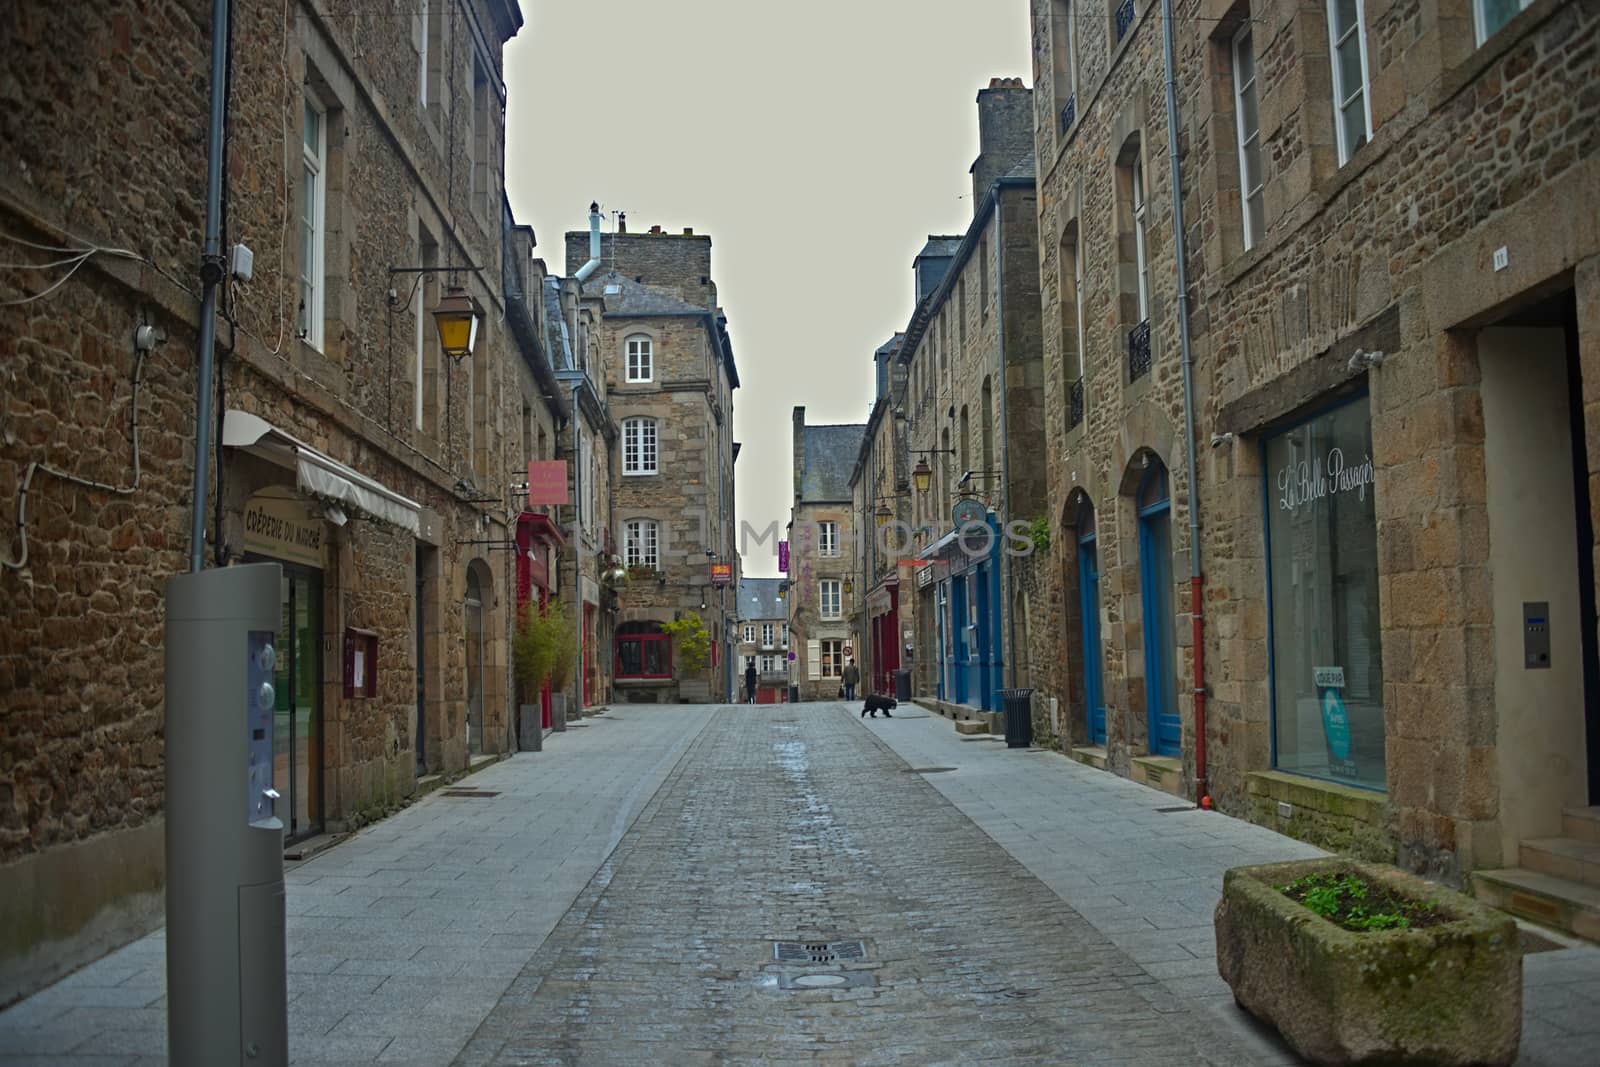 DINAN, FRANCE - April 7th 2019 - Empty street with stone building in traditional town by sheriffkule